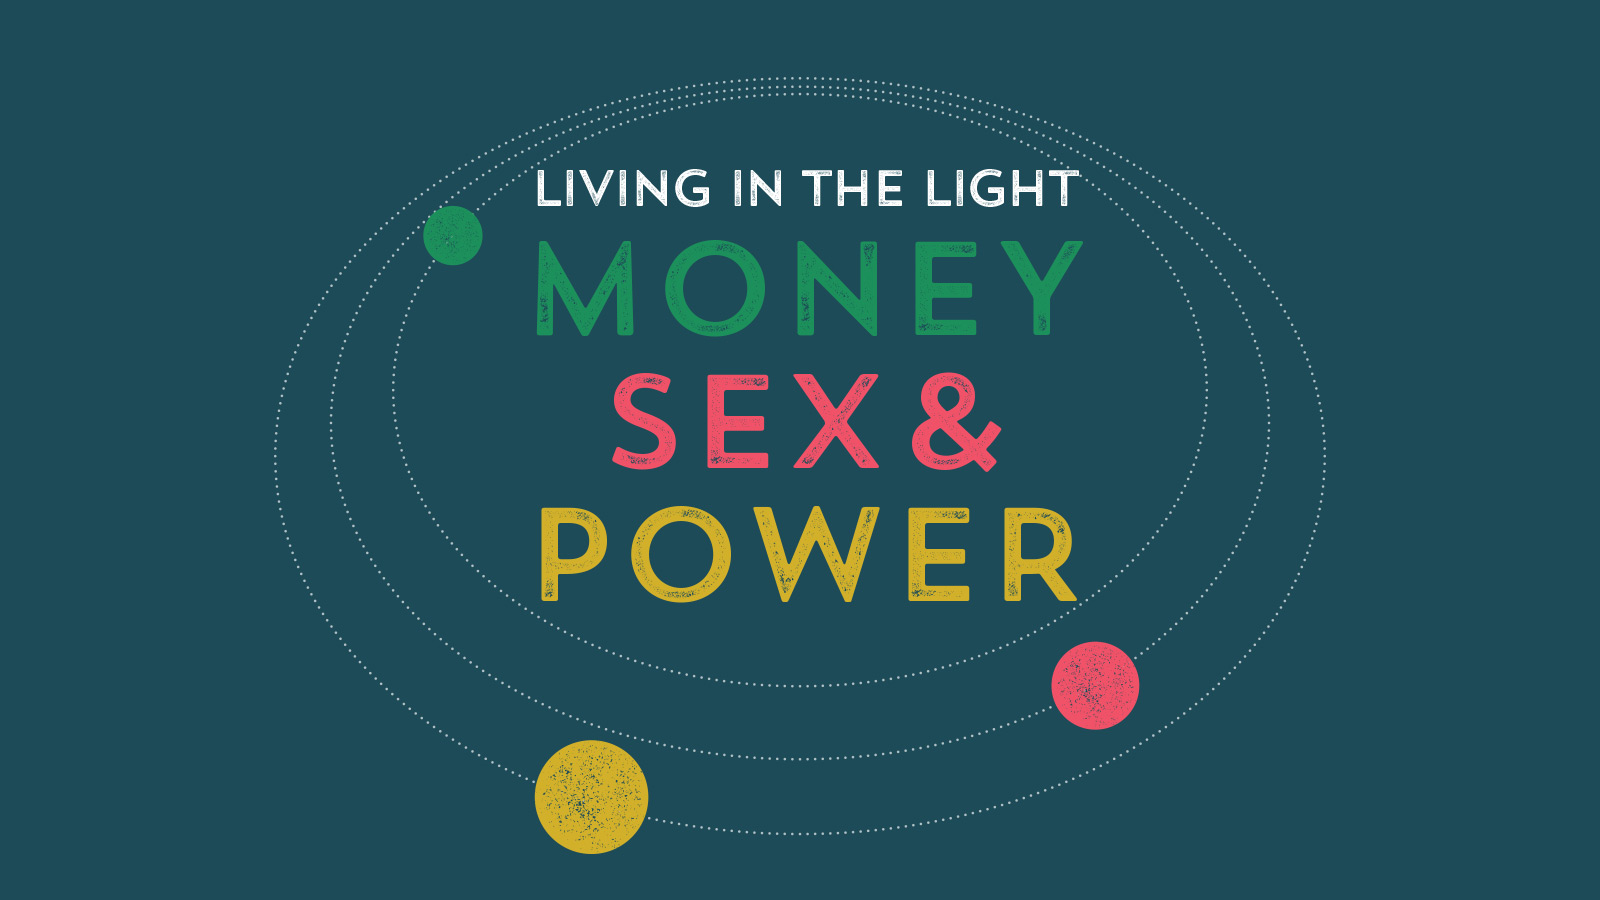 Money, Sex, and Power Definitions and Foundations Desiring photo